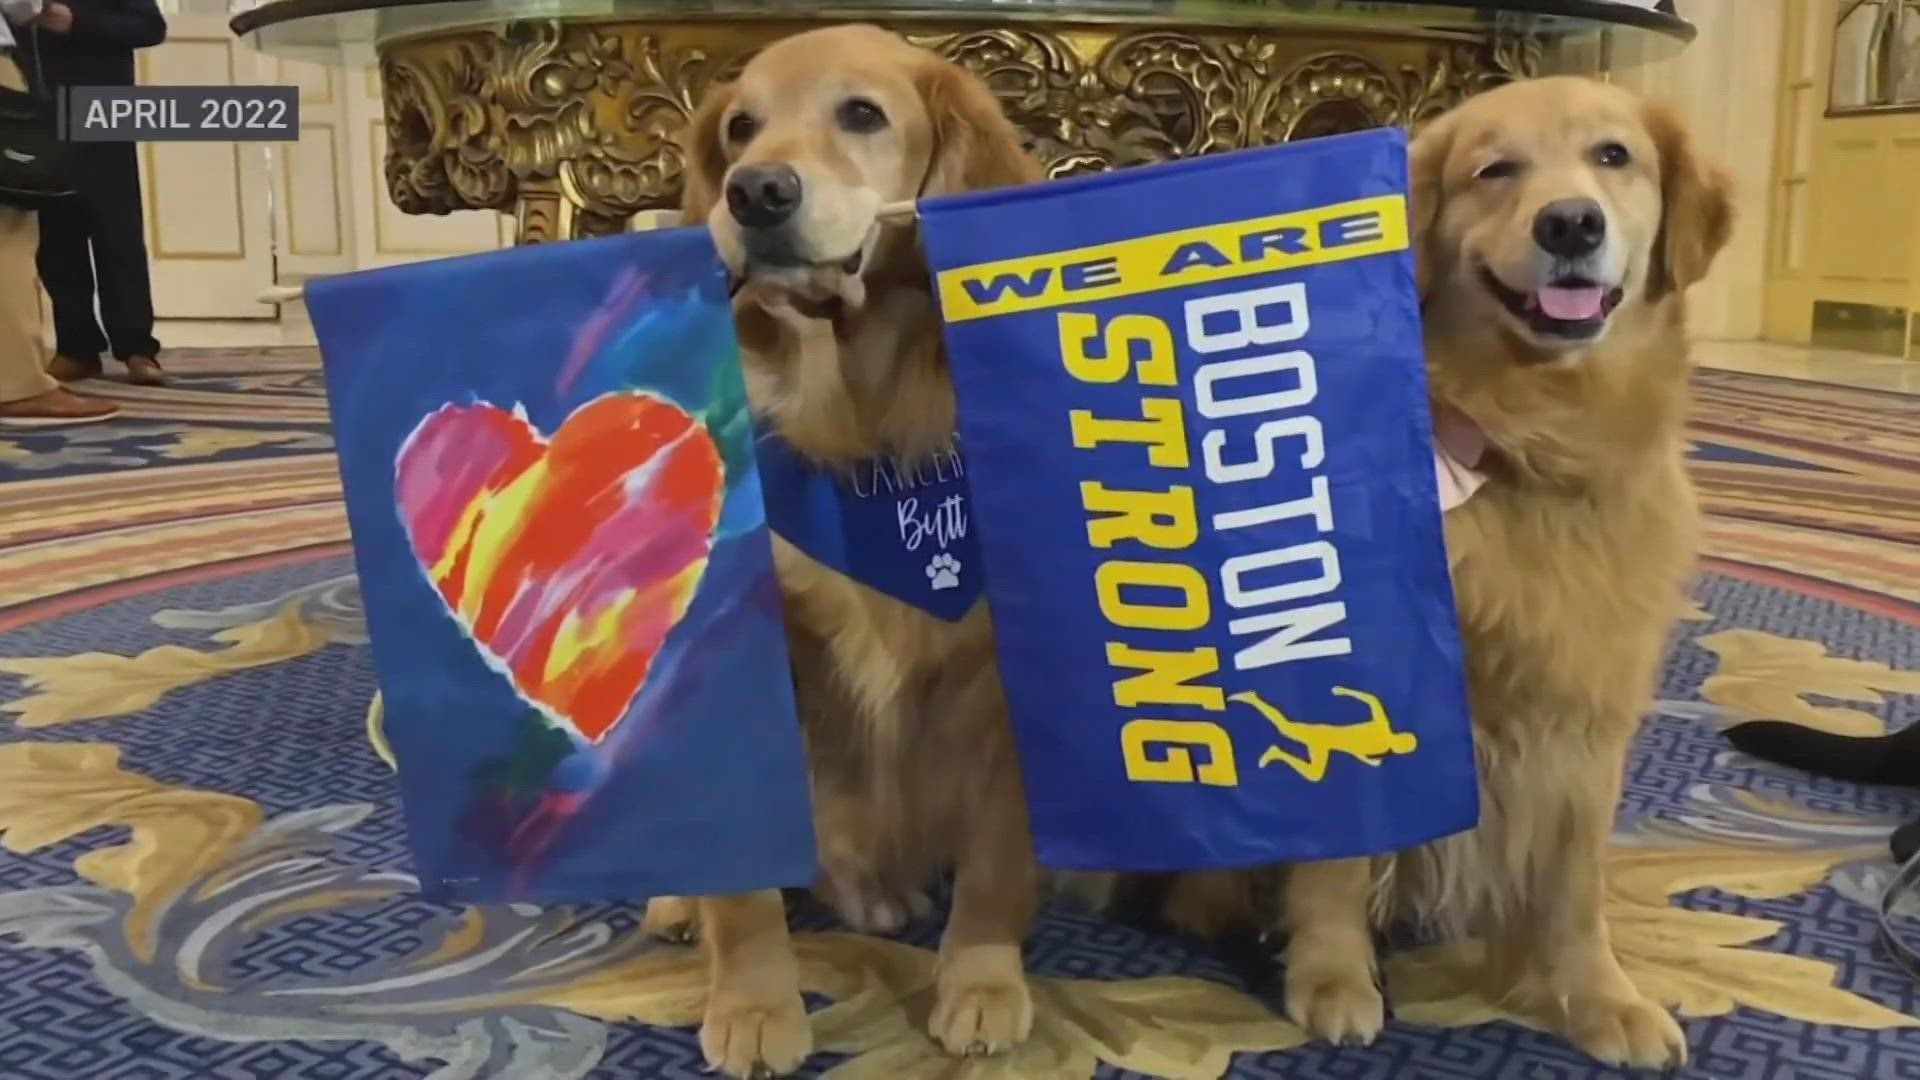 Beloved Boston Marathon dog who became its mascot has died